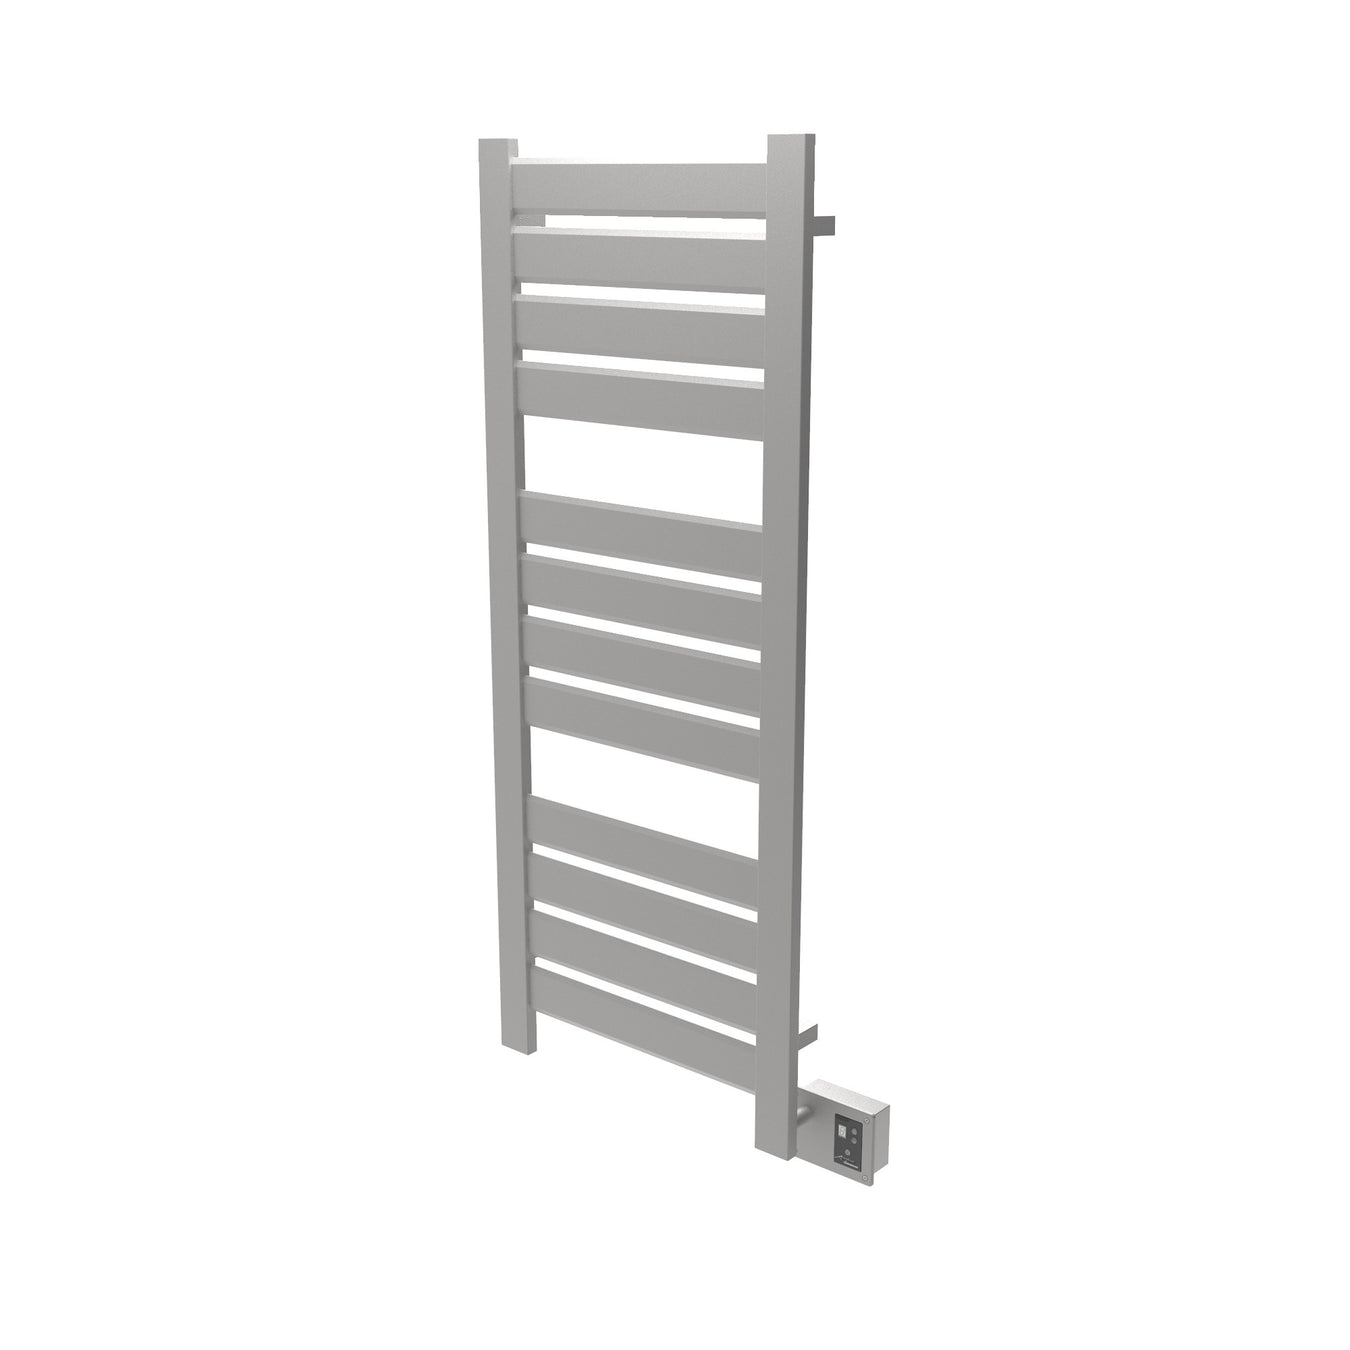 Amba Products Vega Collection V2356 Towel Warmers